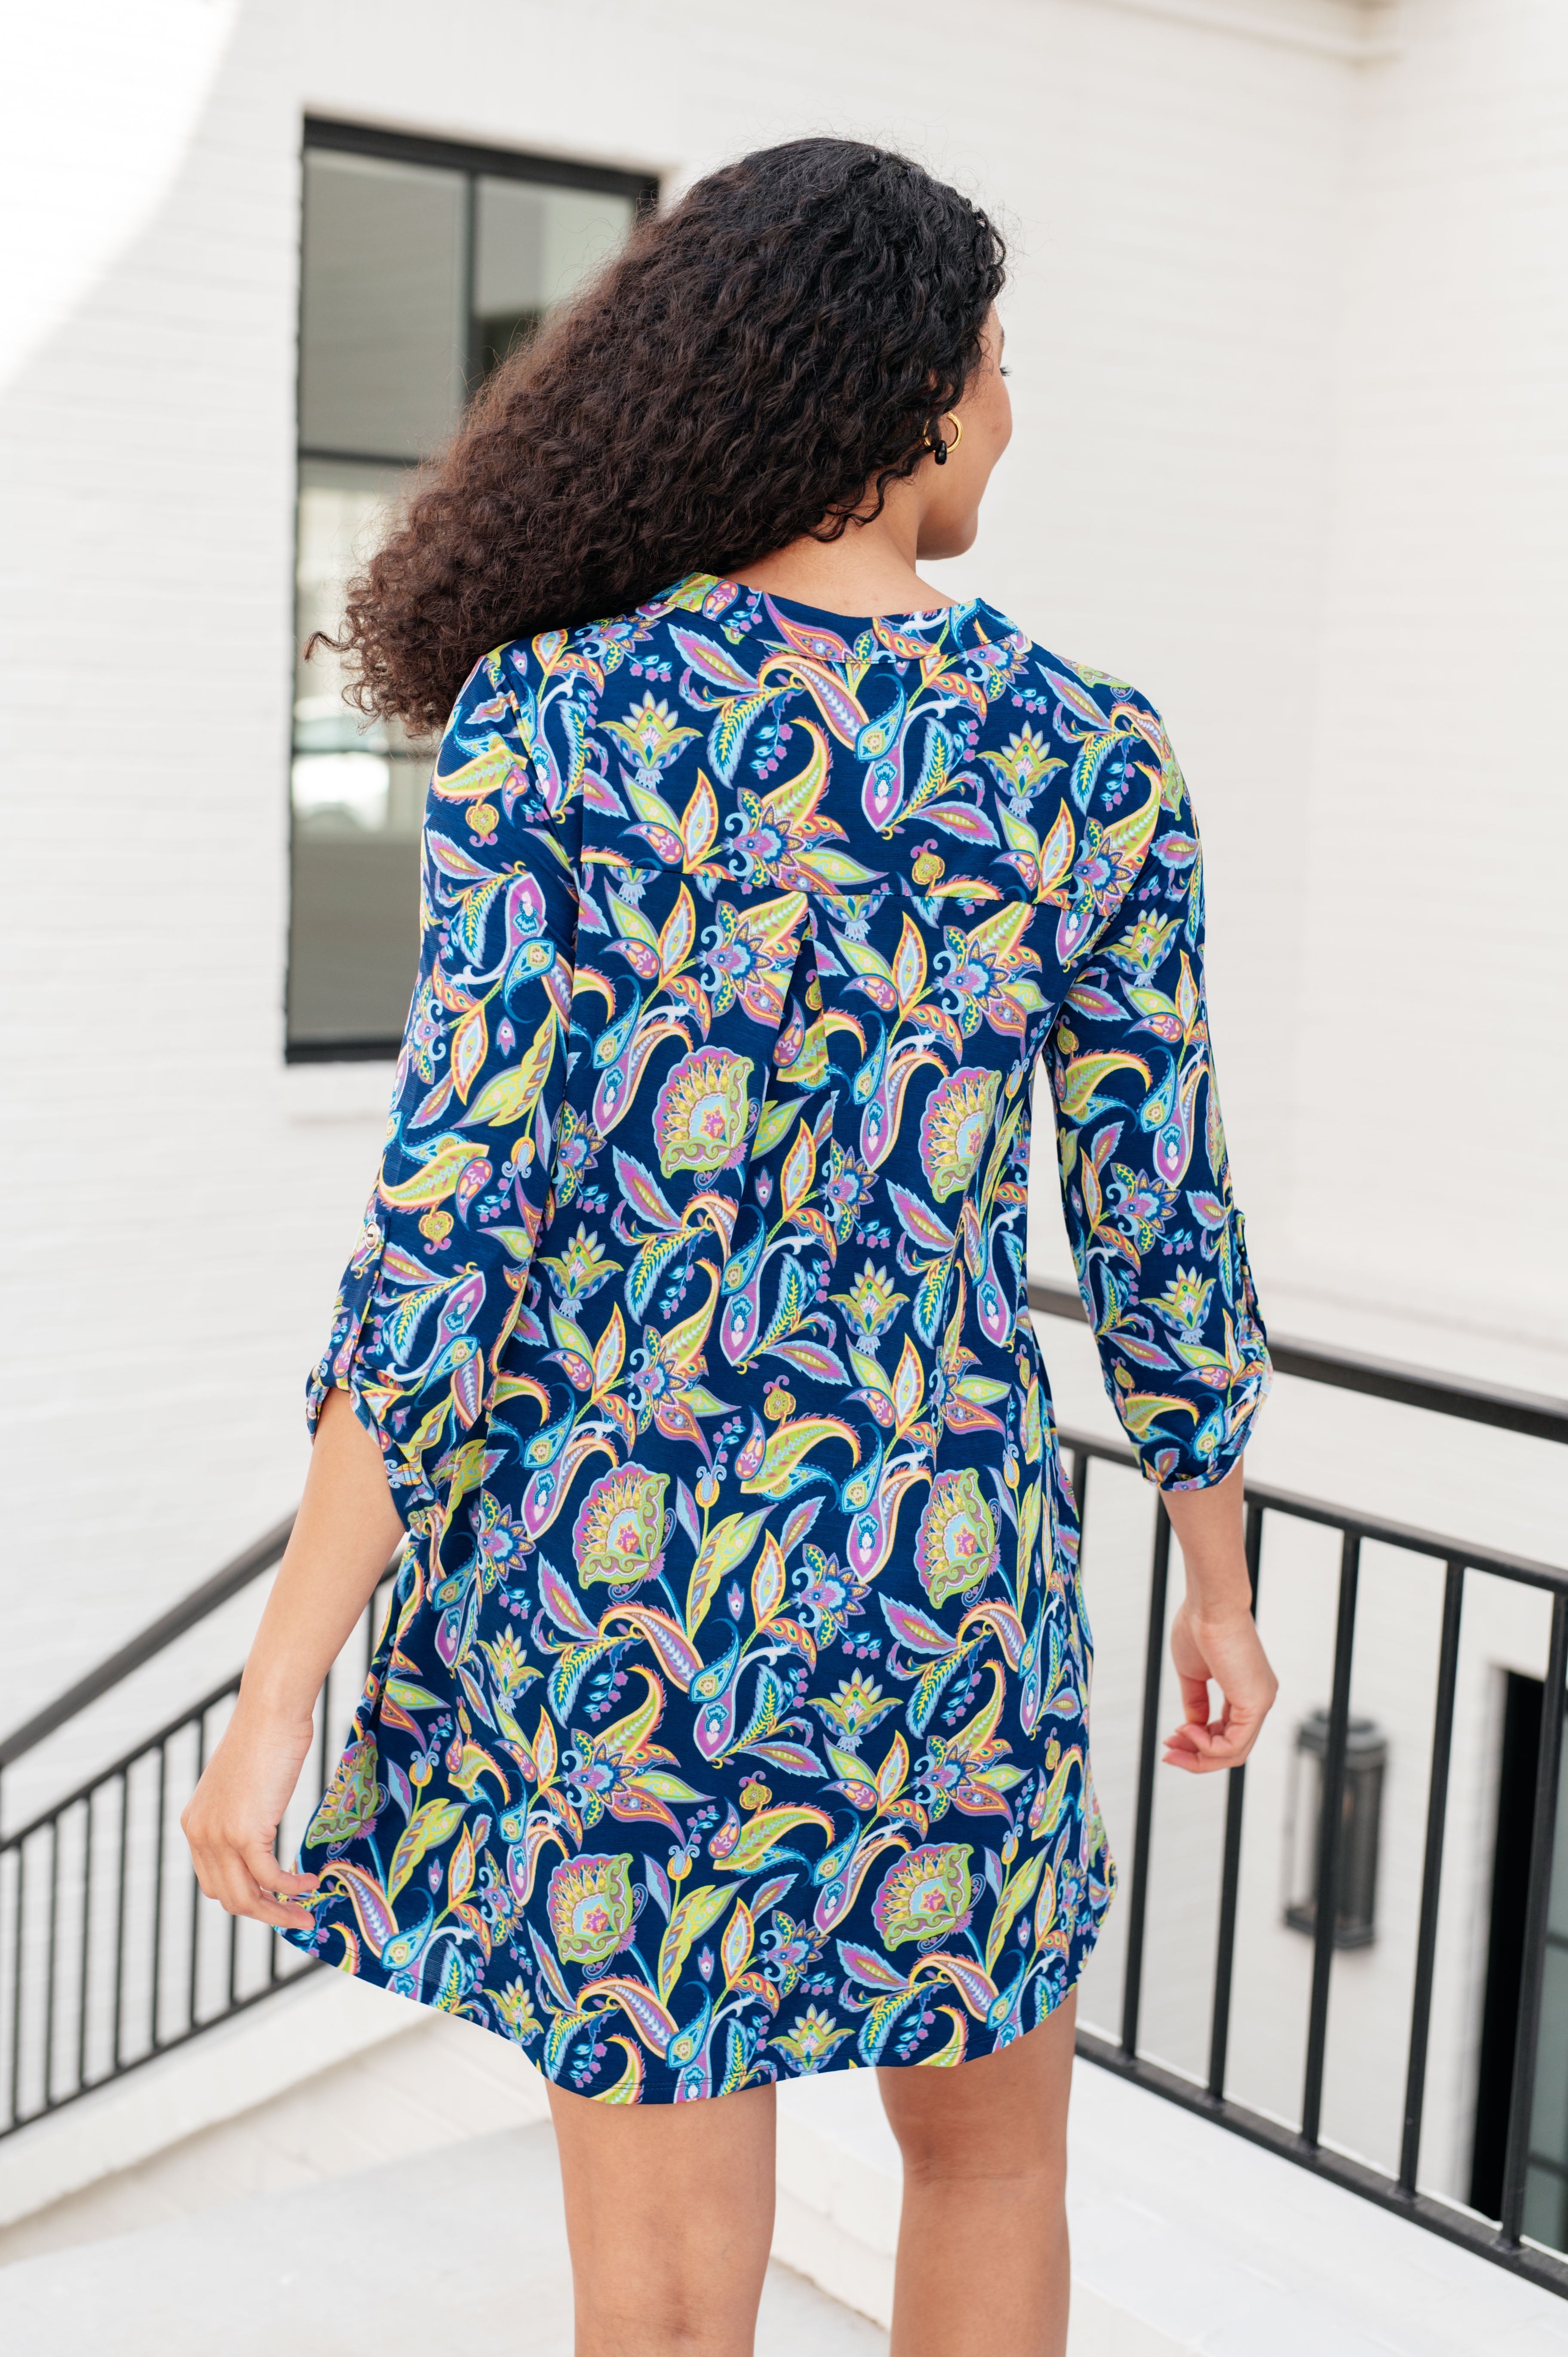 Lizzy Dress in Navy and Bright Paisley Floral Ave Shops